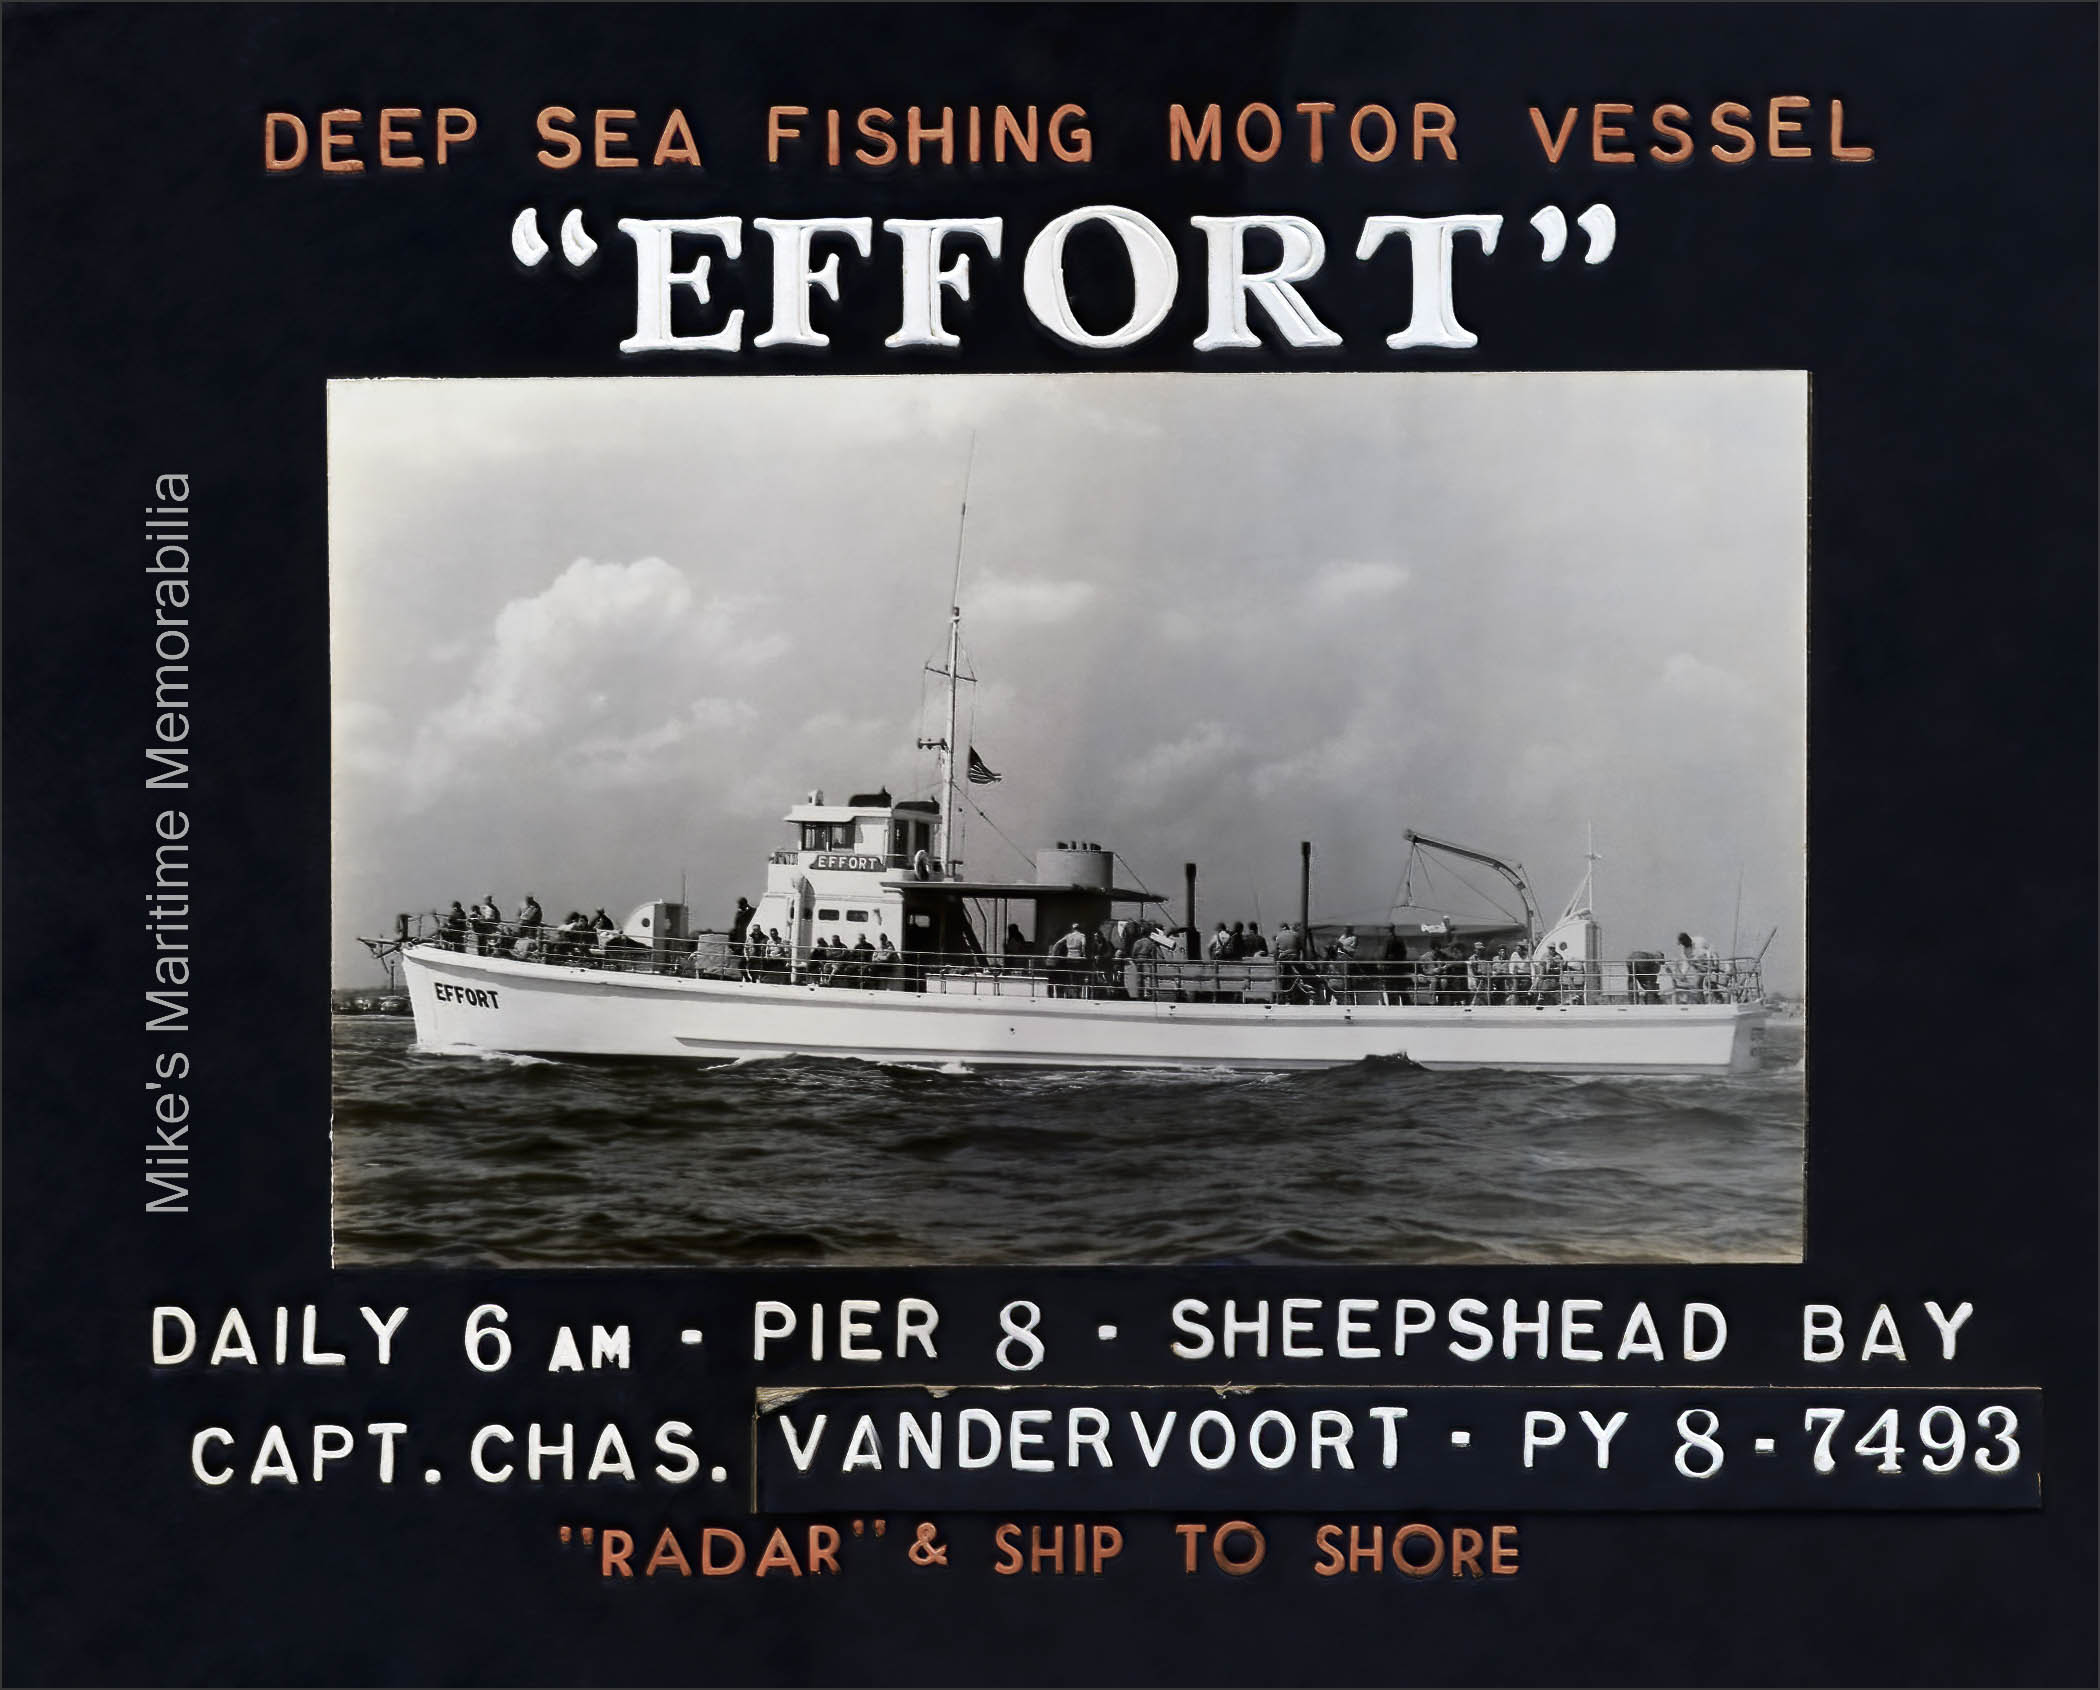 EFFORT Advertising Sign, Brooklyn, NY – 1958 Advertising signs like this one for the party fishing boat "EFFORT" promoted deep sea fishing boats at sporting goods stores and other local businesses in Brooklyn, NY circa 1958. Captain Charles VanDerVoort was at the helm of the "EFFORT" at the time and would later take over operation of the business when Captain Fred Wrege passed away in 1961. The "EFFORT" was a converted World War II U.S. Navy Subchaser built in 1942 by Perkins and Vaughn, Inc. at Wickford, RI as the "SC-1300". The sign is courtesy of the Captain Fred Wrege and Captain Charles VanDerVoort families.